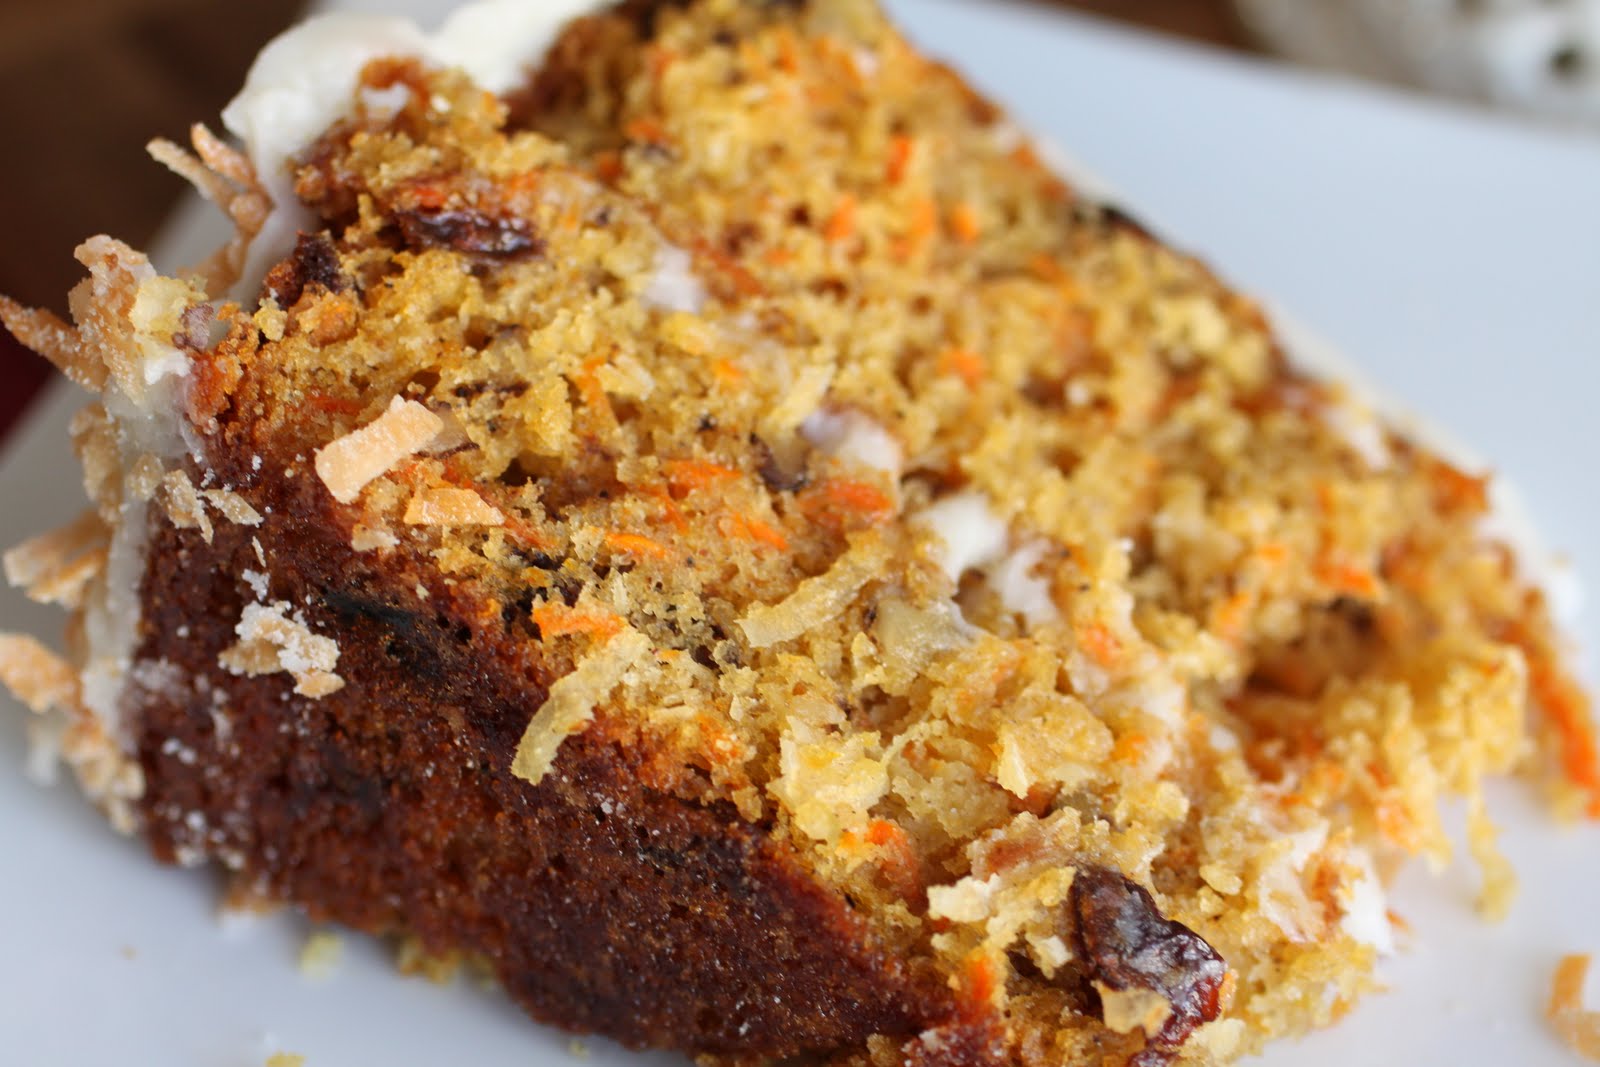 Coconut Pineapple Carrot Cake with Cream Cheese Frosting